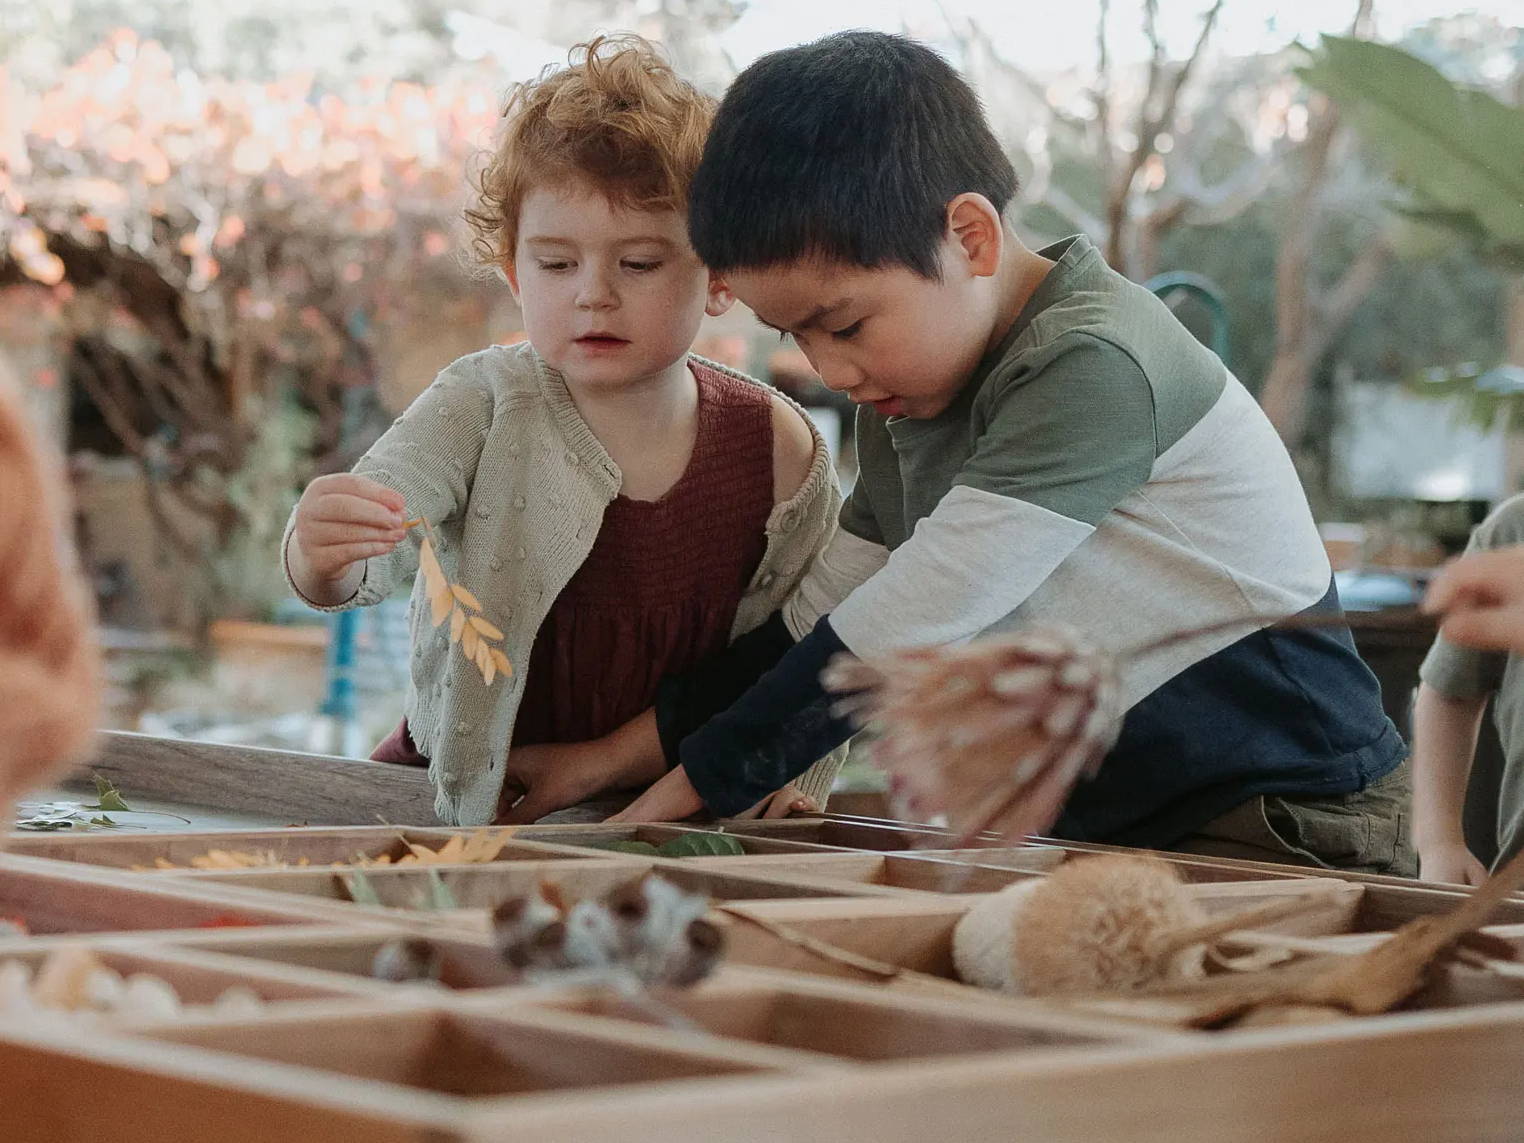 Children Engaging with Nature's Bounty on the Sensory Play Table